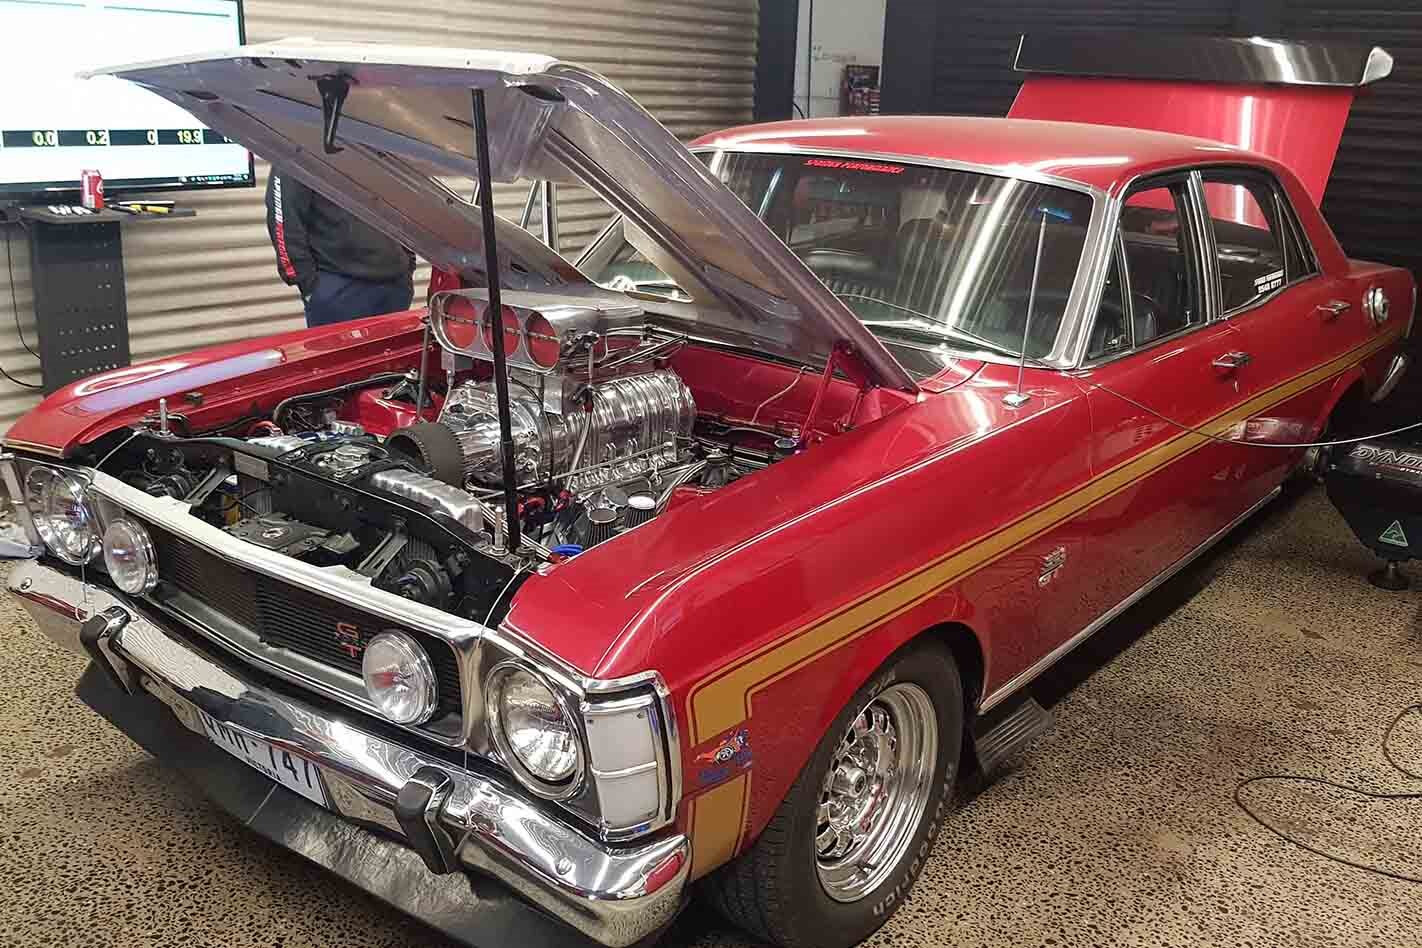 Blown 427-powered XW Fairmont on the dyno – Video